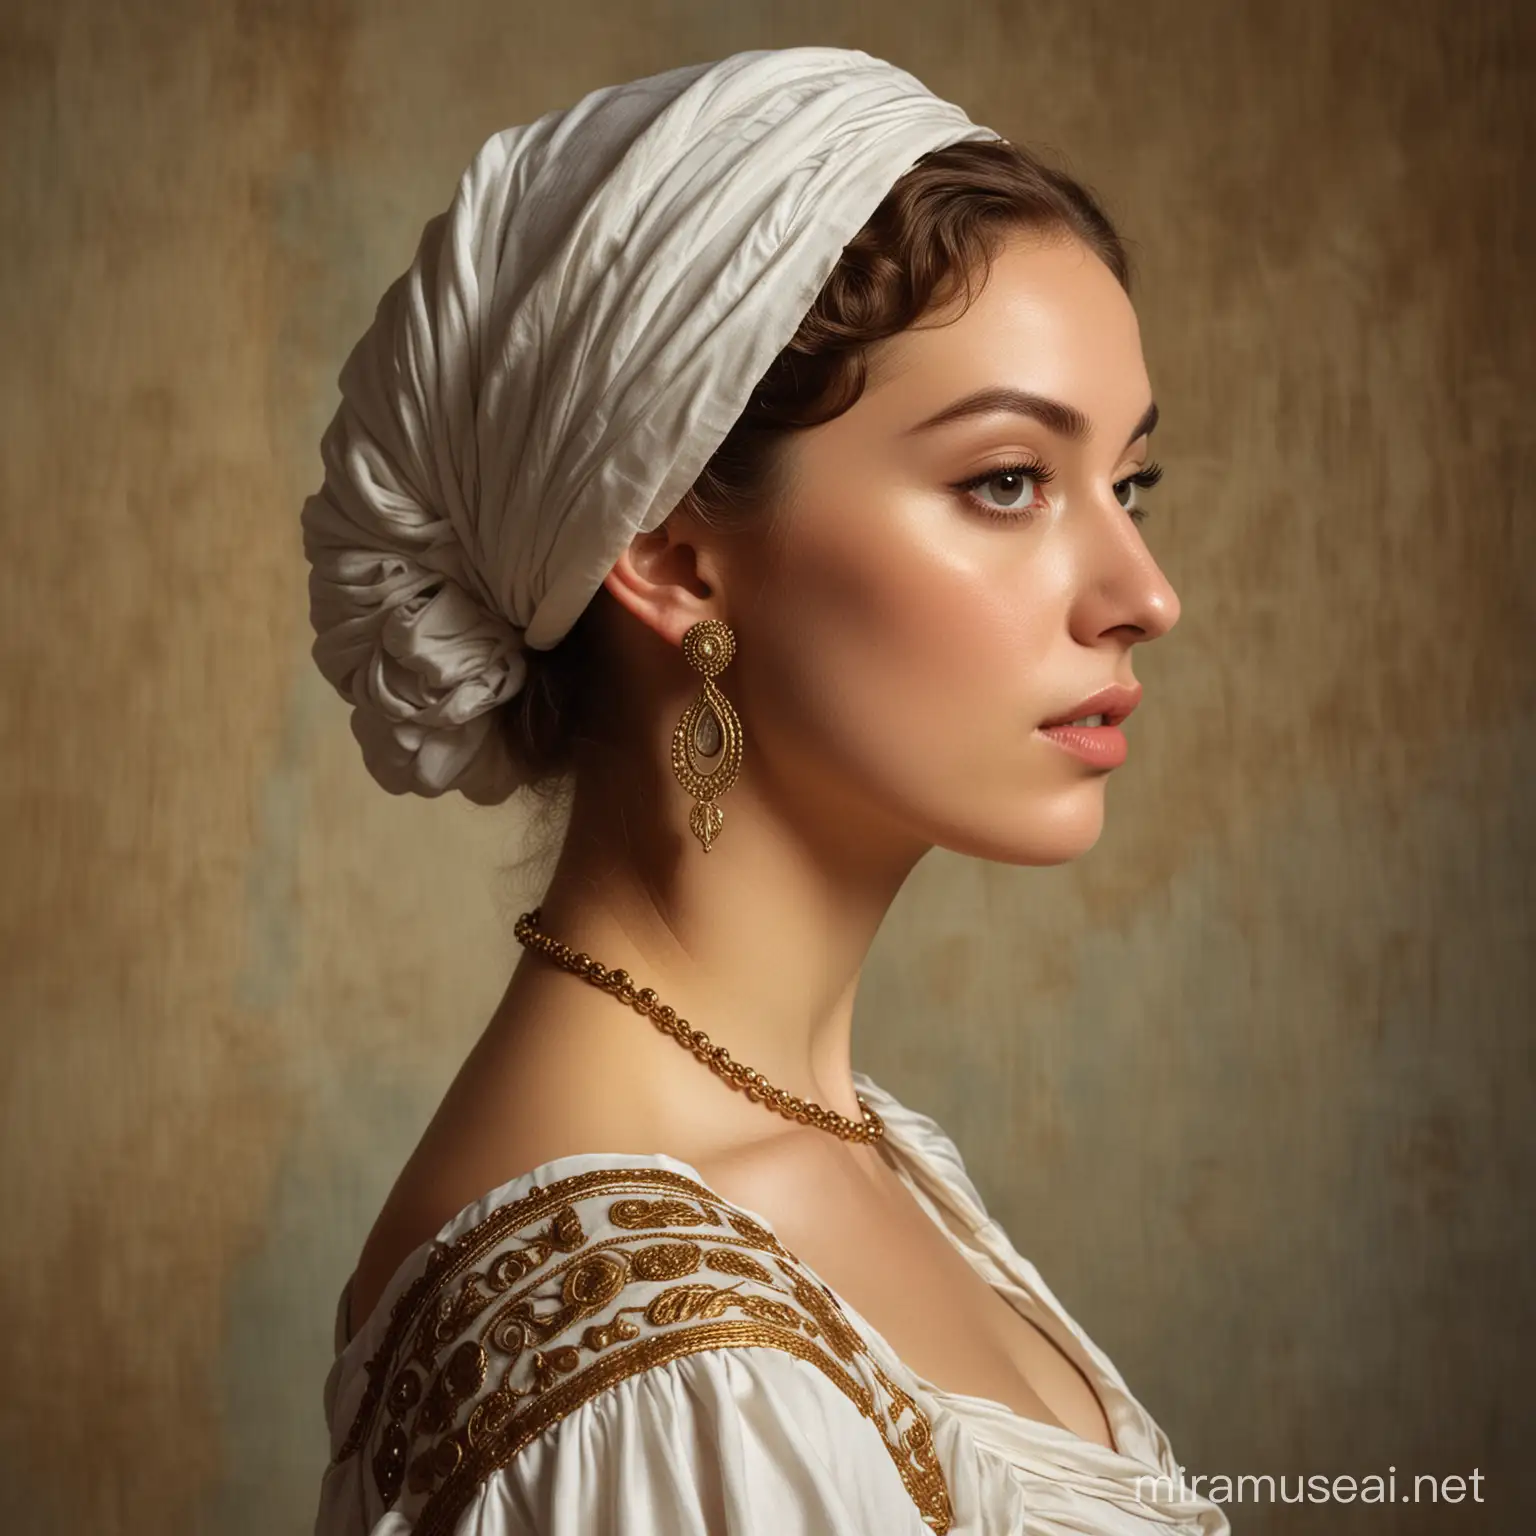 Greek mythology
portrait of beautiful young woman 
standing up left profile wearing ancient greek dress
inspired by jean dominique ingres the turkish bath
face like young Romy Schneider